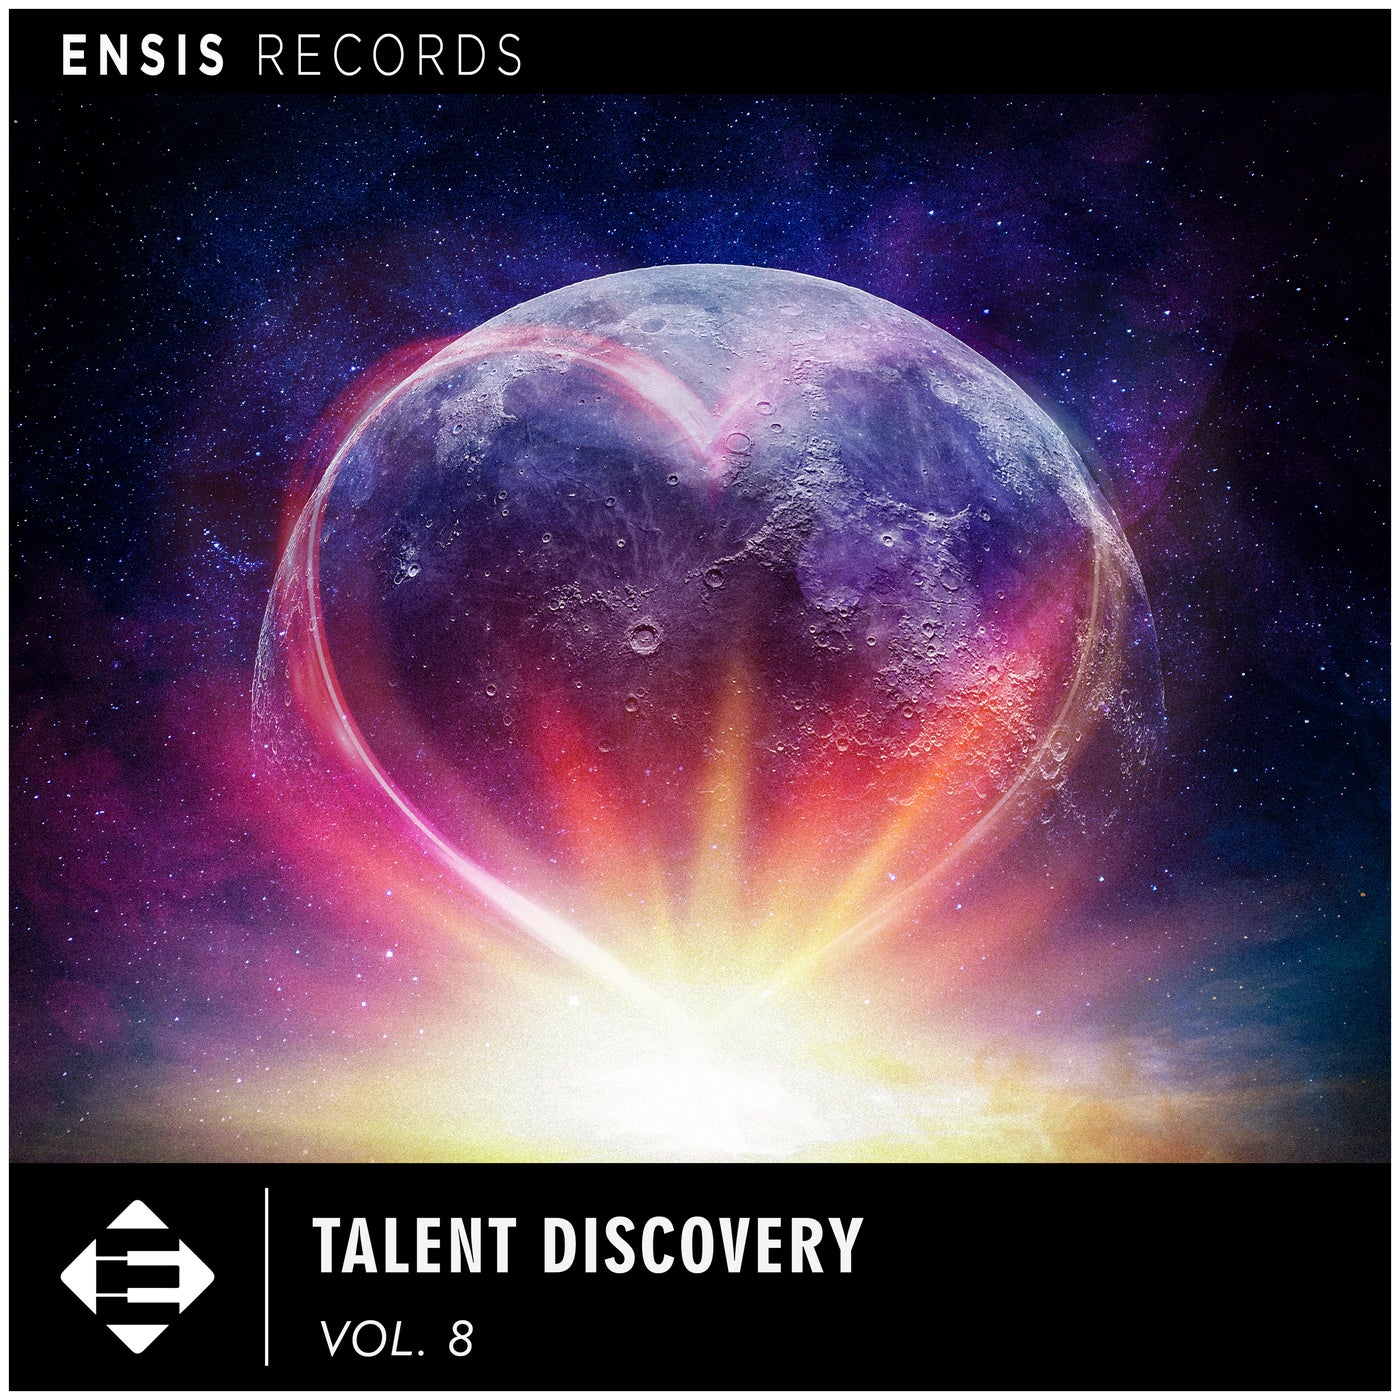 Talent Discovery, Vol. 8